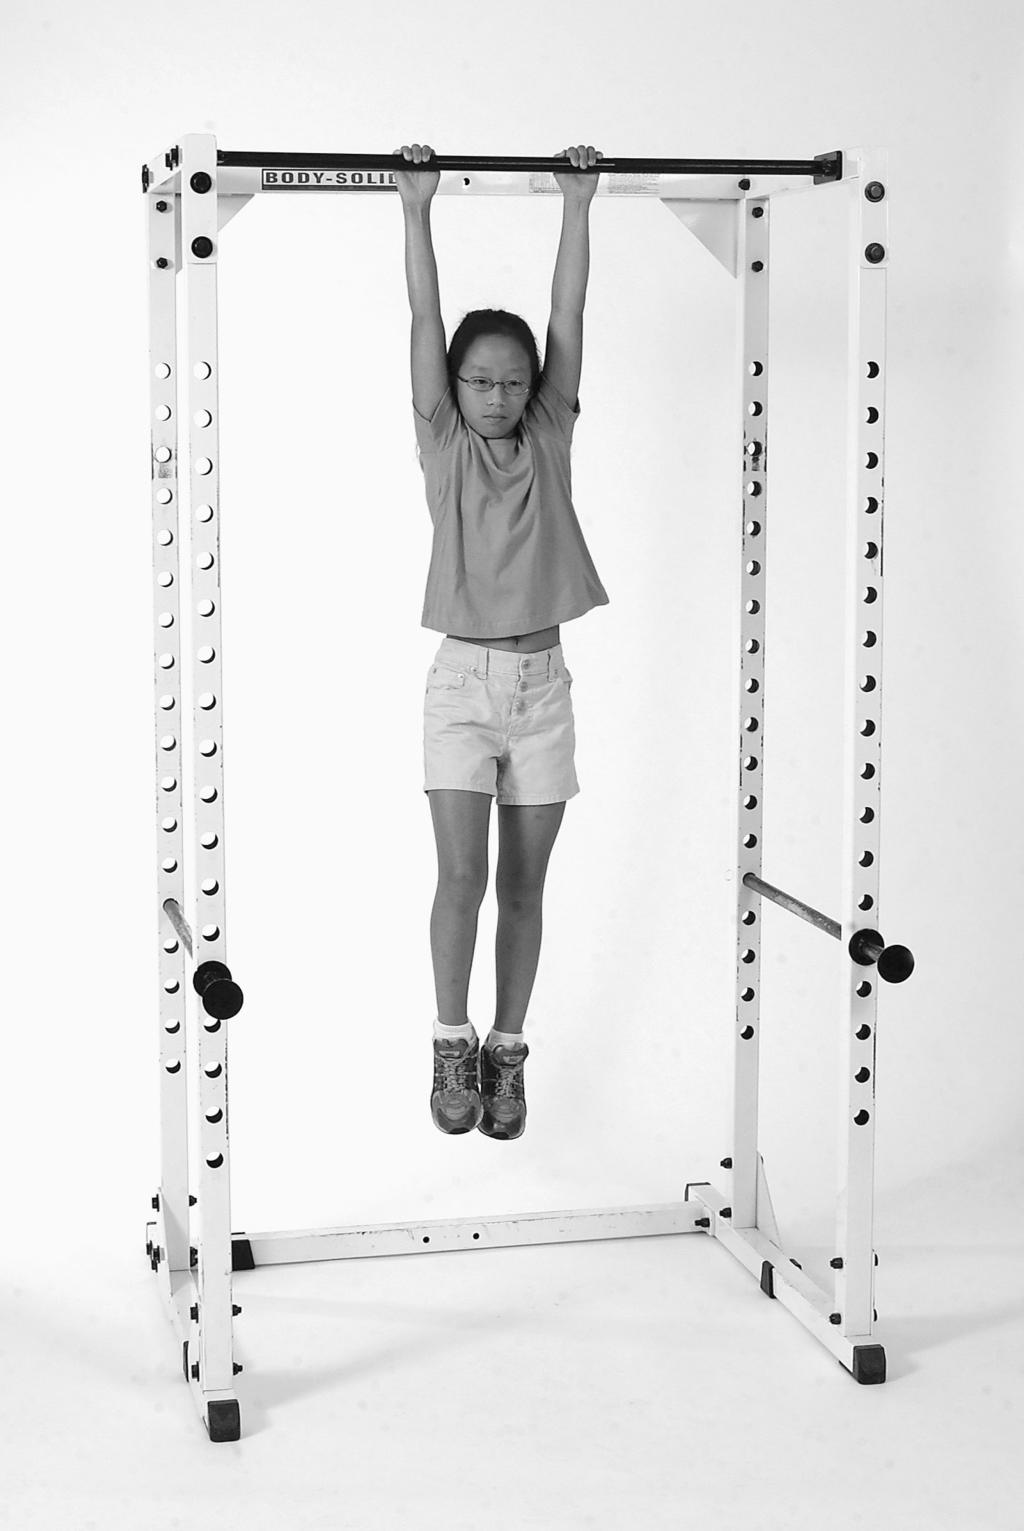 Muscular Strength, Endurance, and Flexibility Pull-Up Equipment and Facilities This test uses a horizontal bar at a height that allows the student to hang with arms fully extended and feet clear of